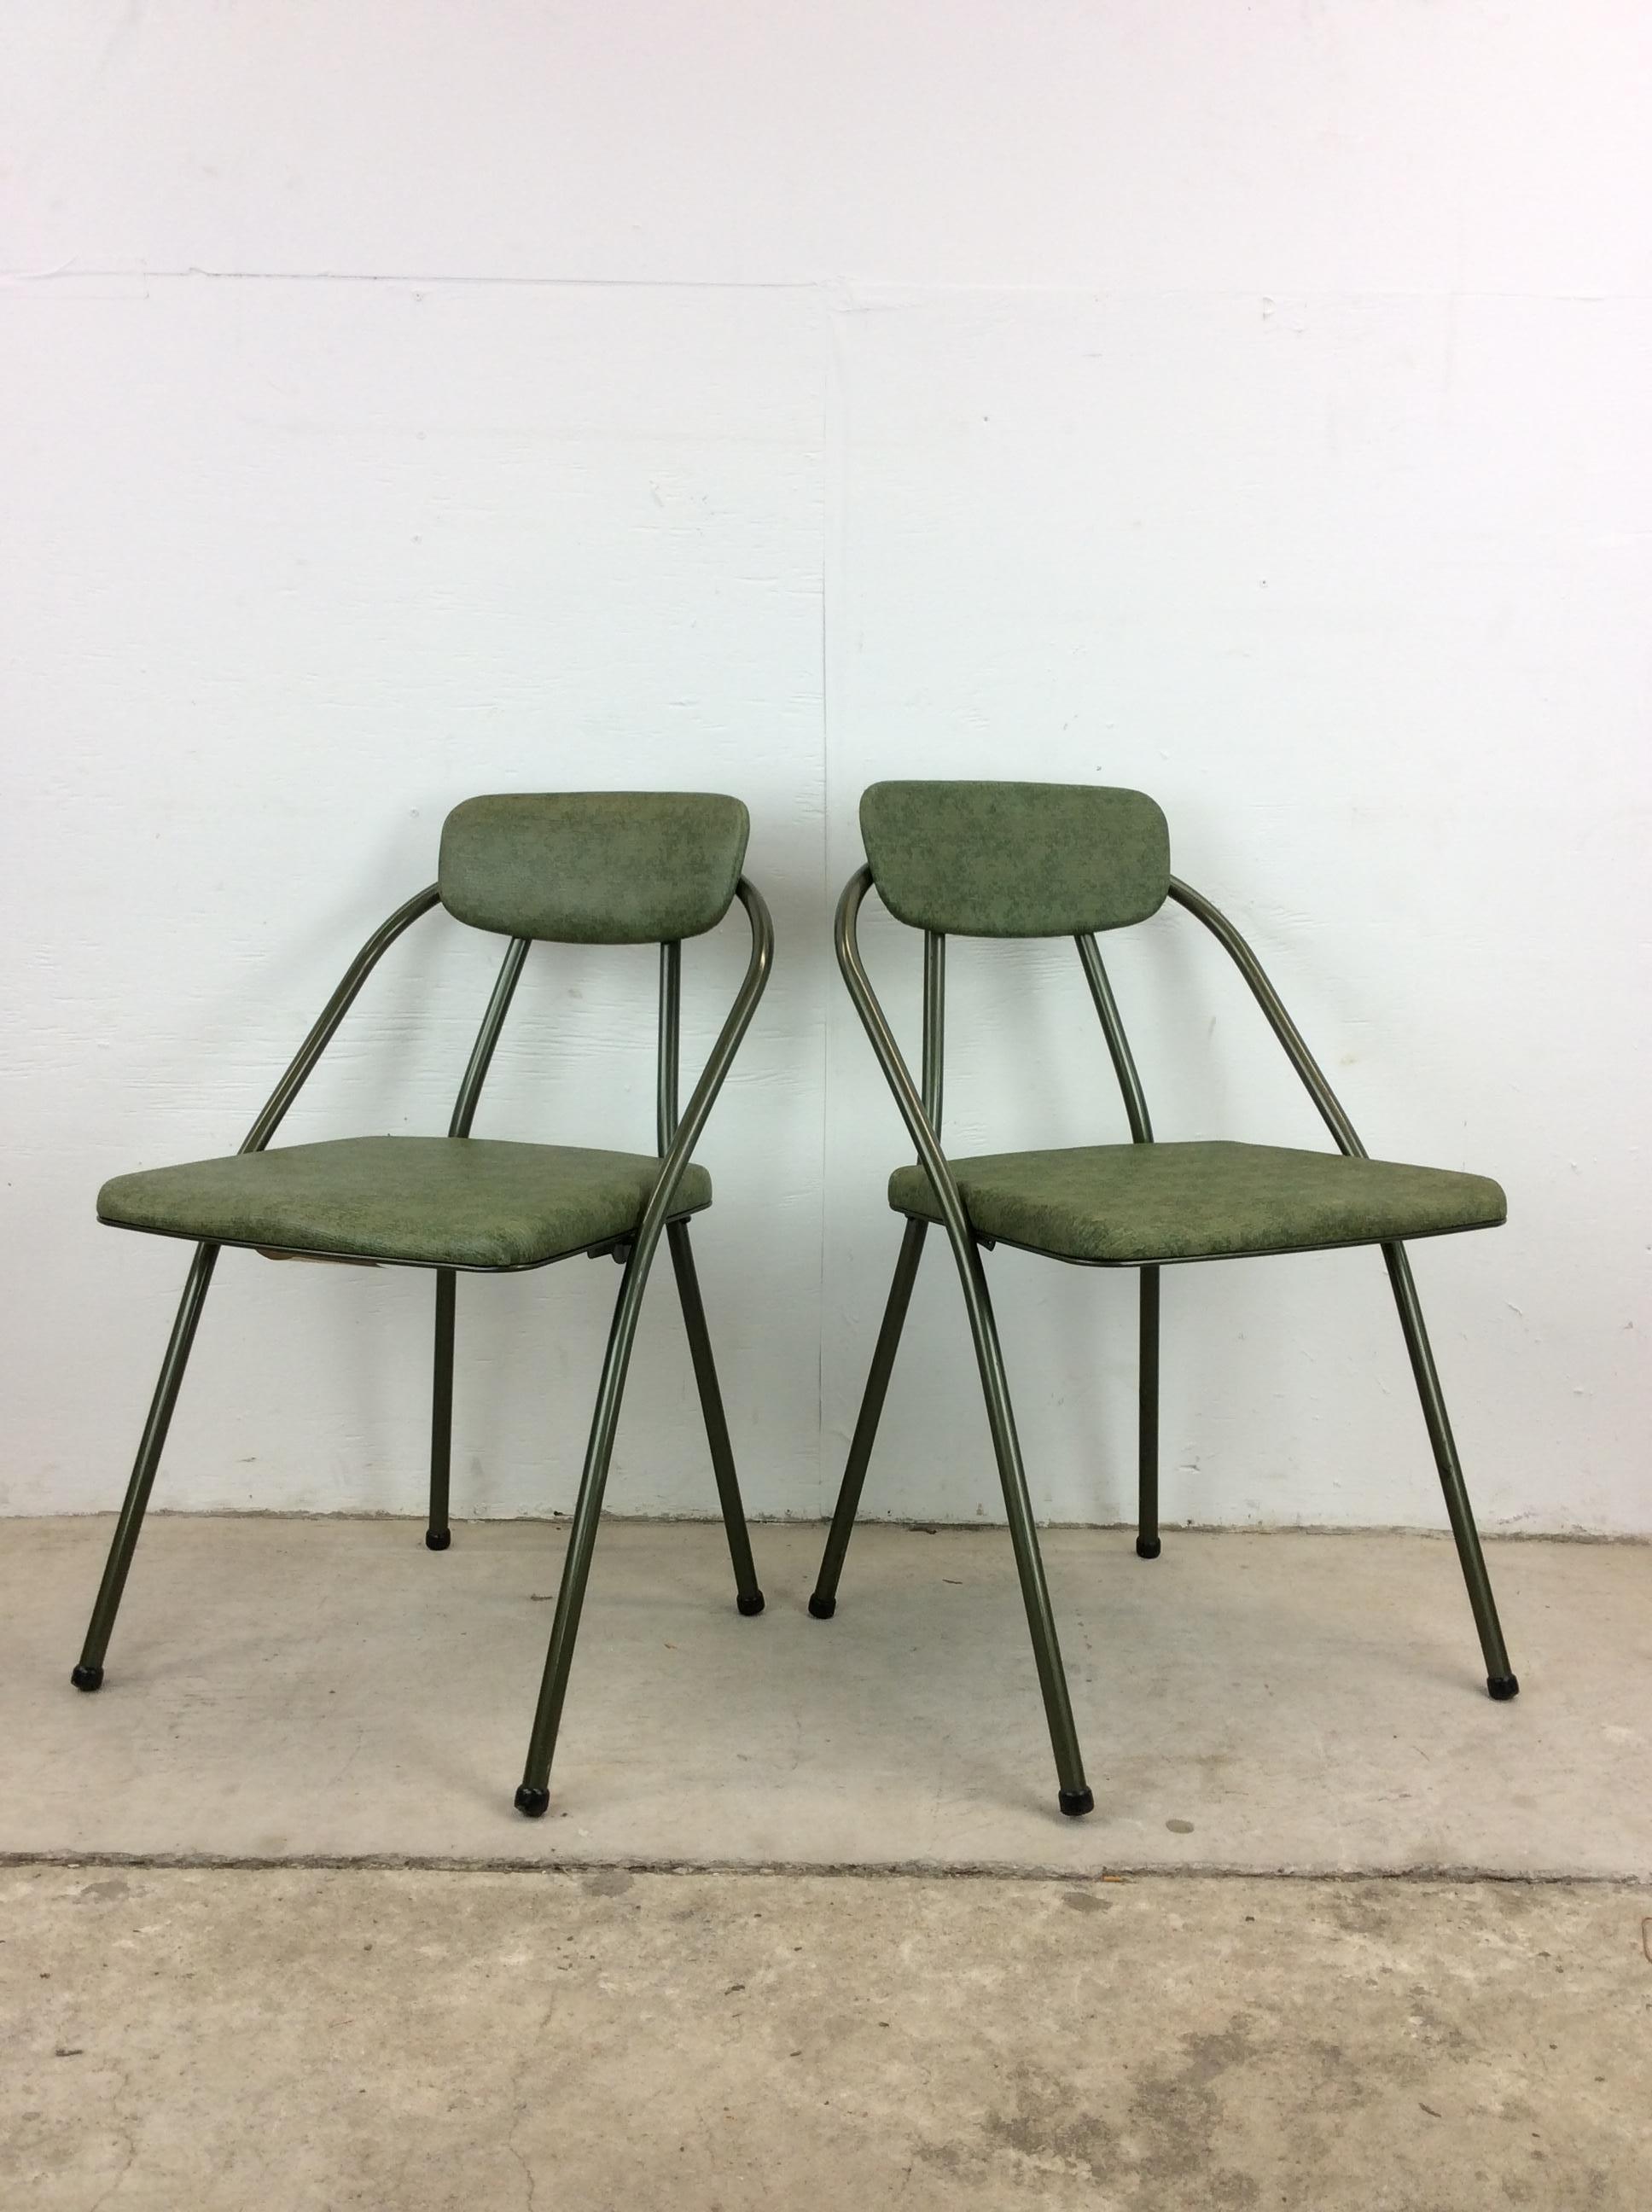 This pair of mid century modern folding chairs by Cosco features sleek modern look, vintage green upholstery, black painted metal frames and rubber capped feet.

Dimensions: 18w 15d 30h 17.5sh

Condition: Vintage green upholstery is in good